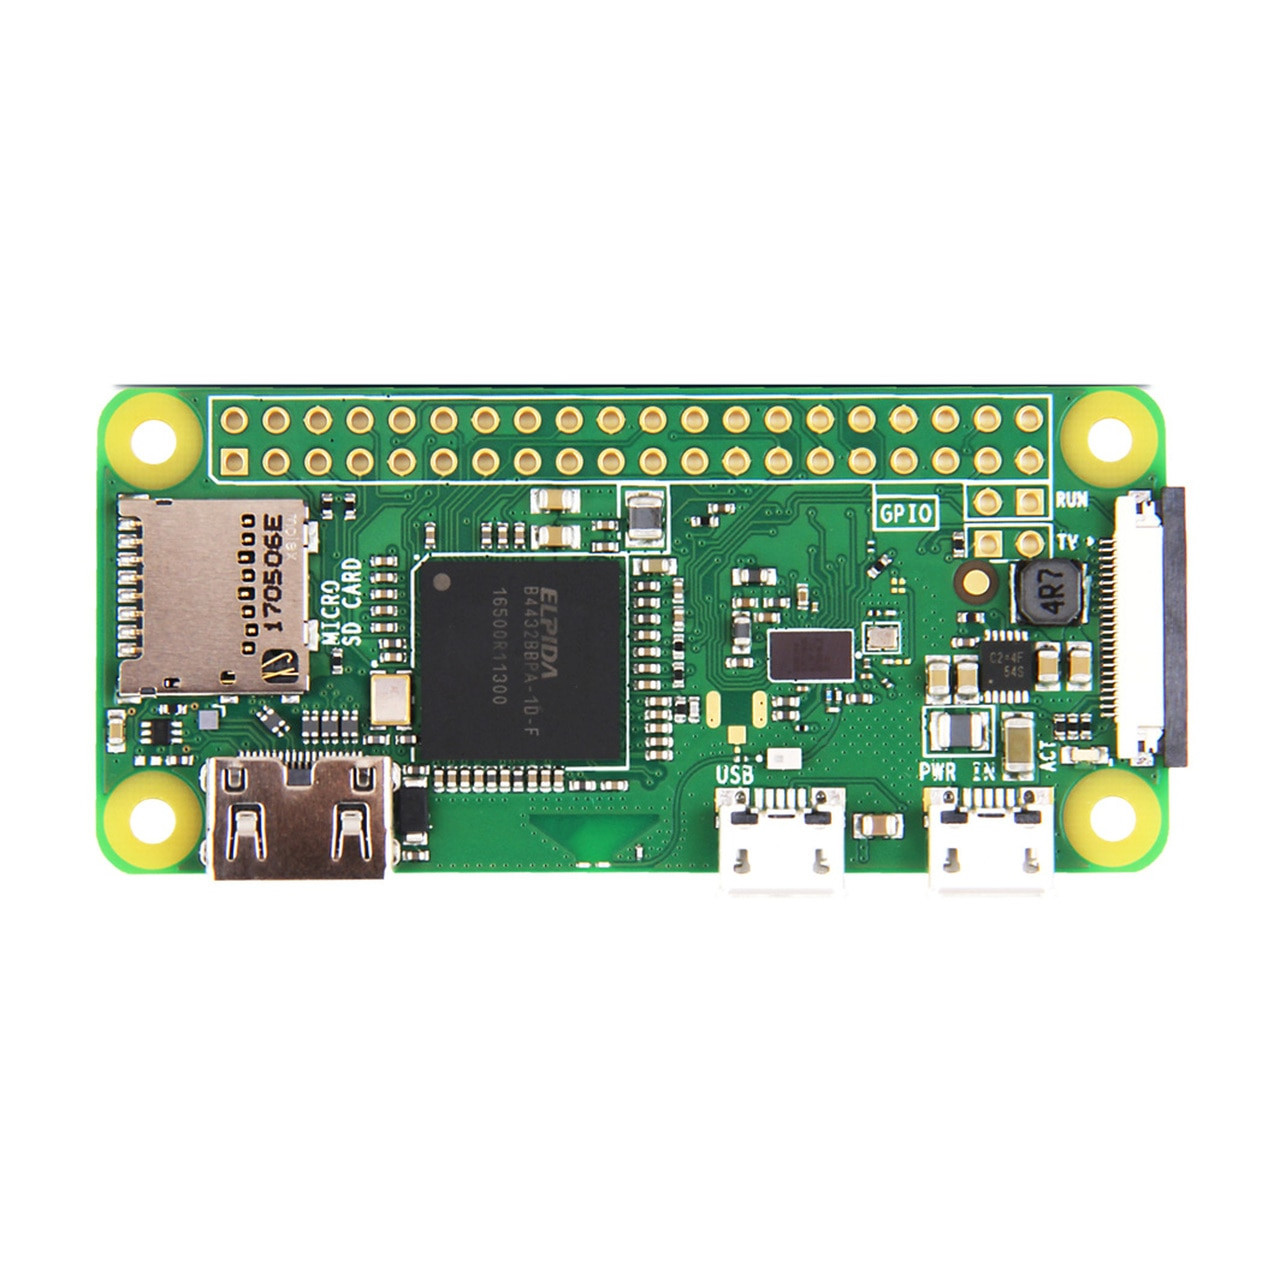 The most complete guide to Raspberry Pi 5 accessories you need to know